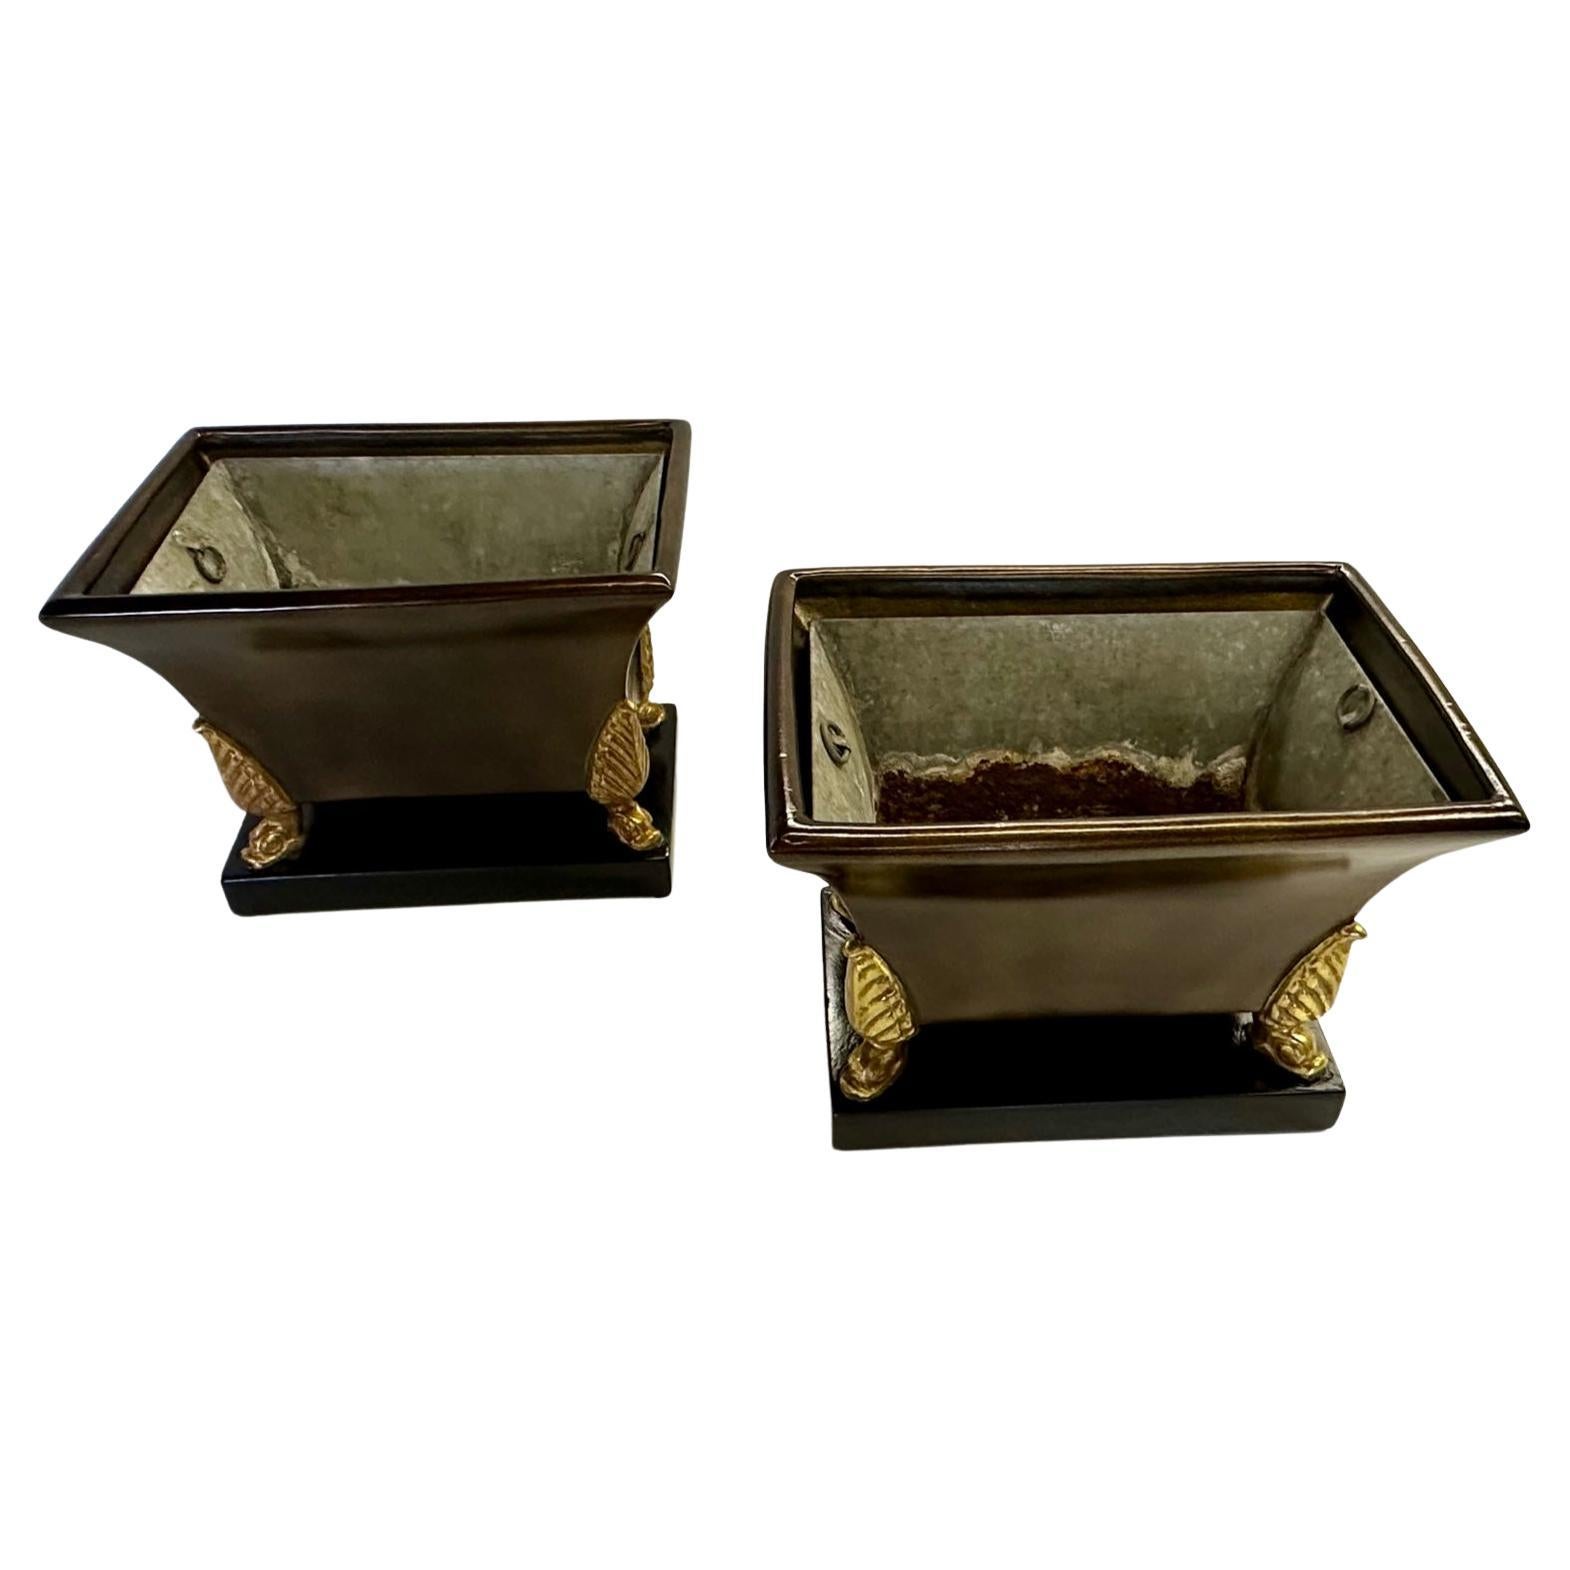 Beautiful pair of vintage Italian Regency style glazed and painted terracotta planters having a warm earthy patina and gilded feet. They each retain original metal liners. Baes are 12.5 x 7.5.